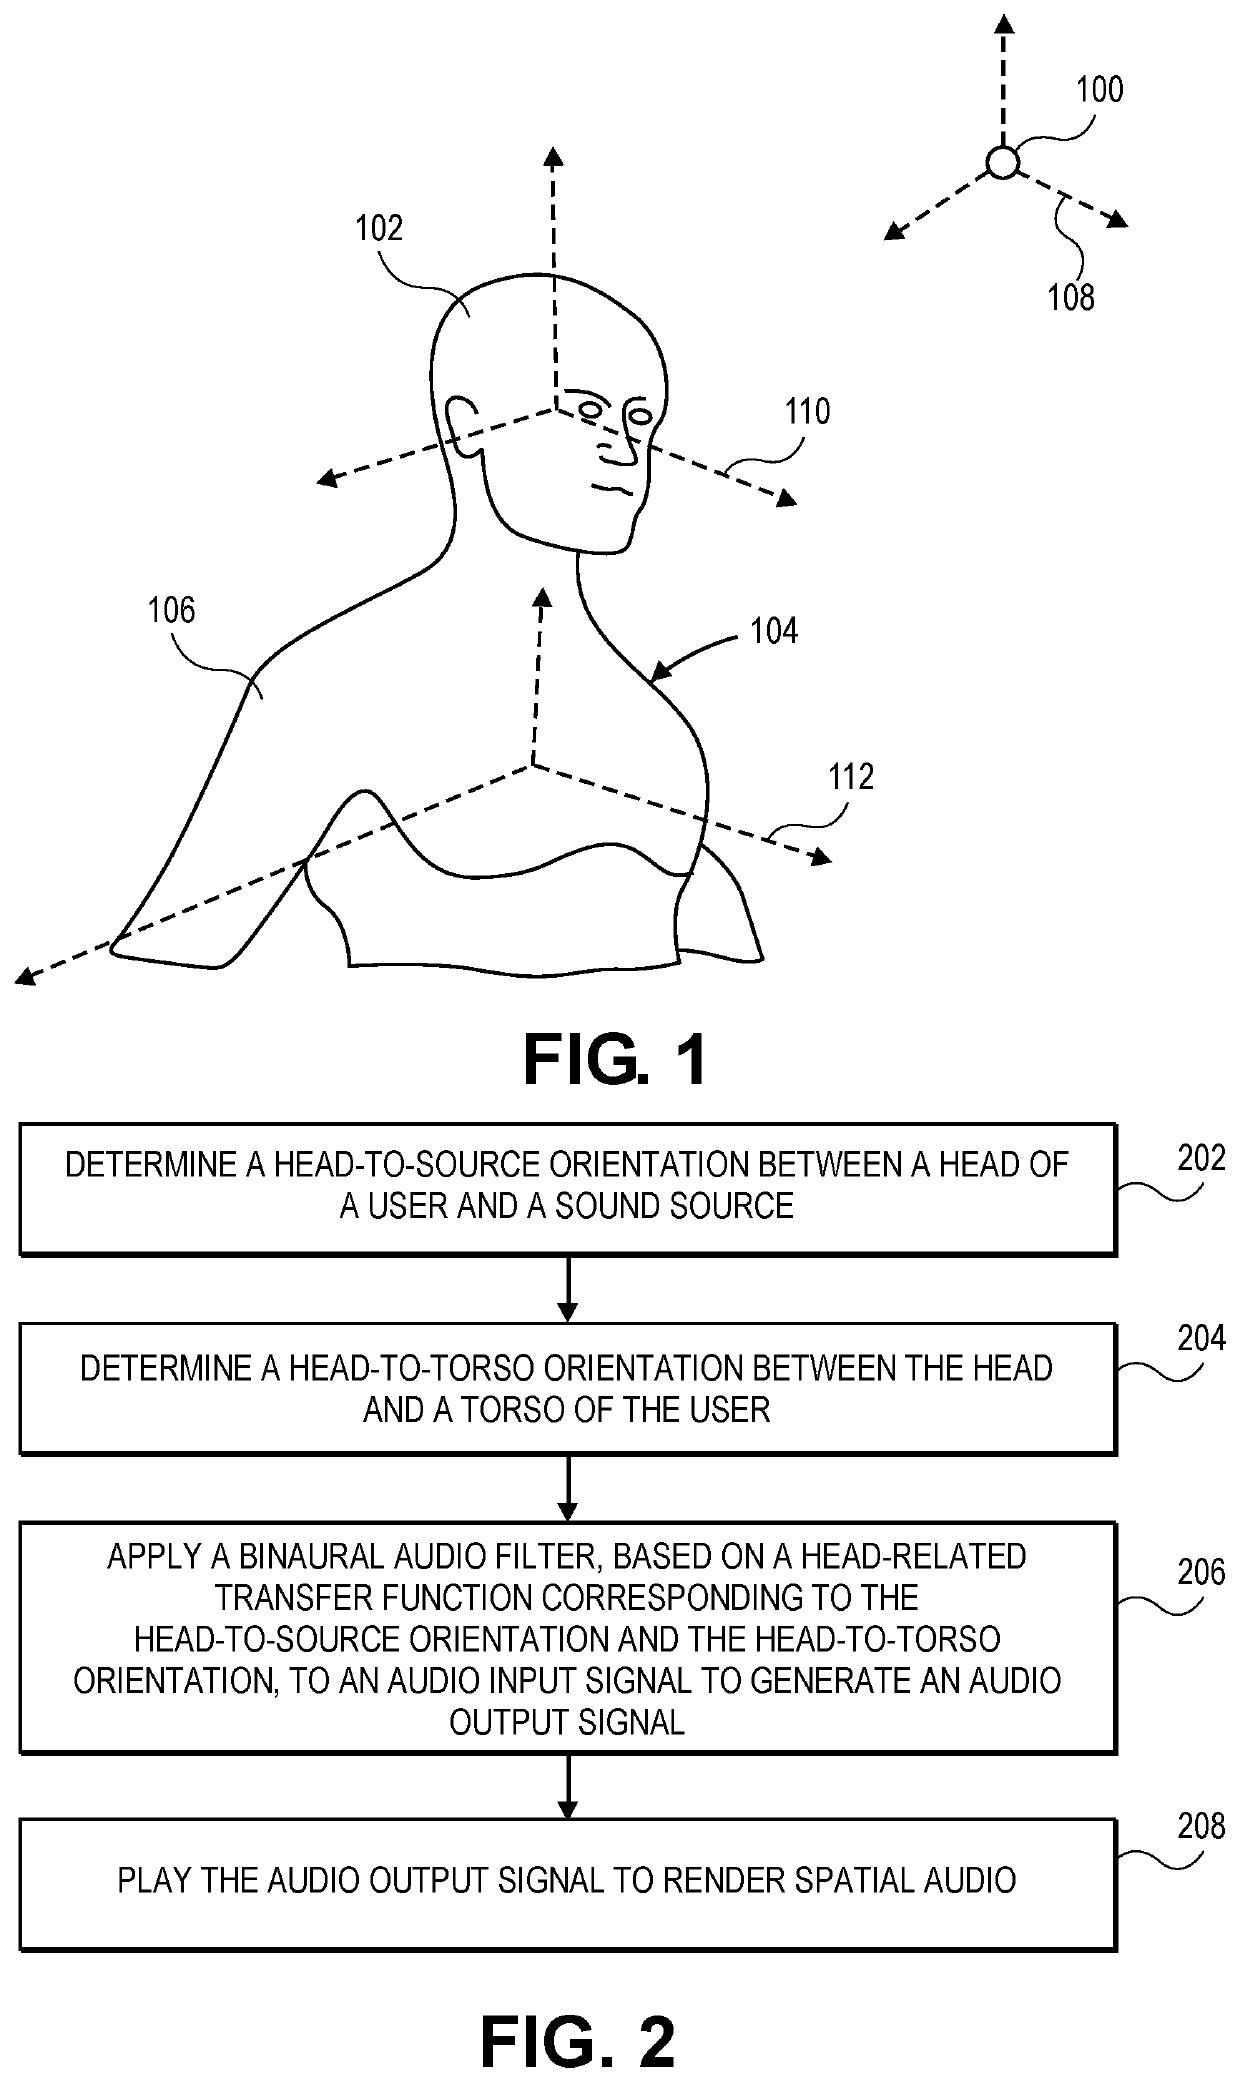 Spatial audio reproduction based on head-to-torso orientation